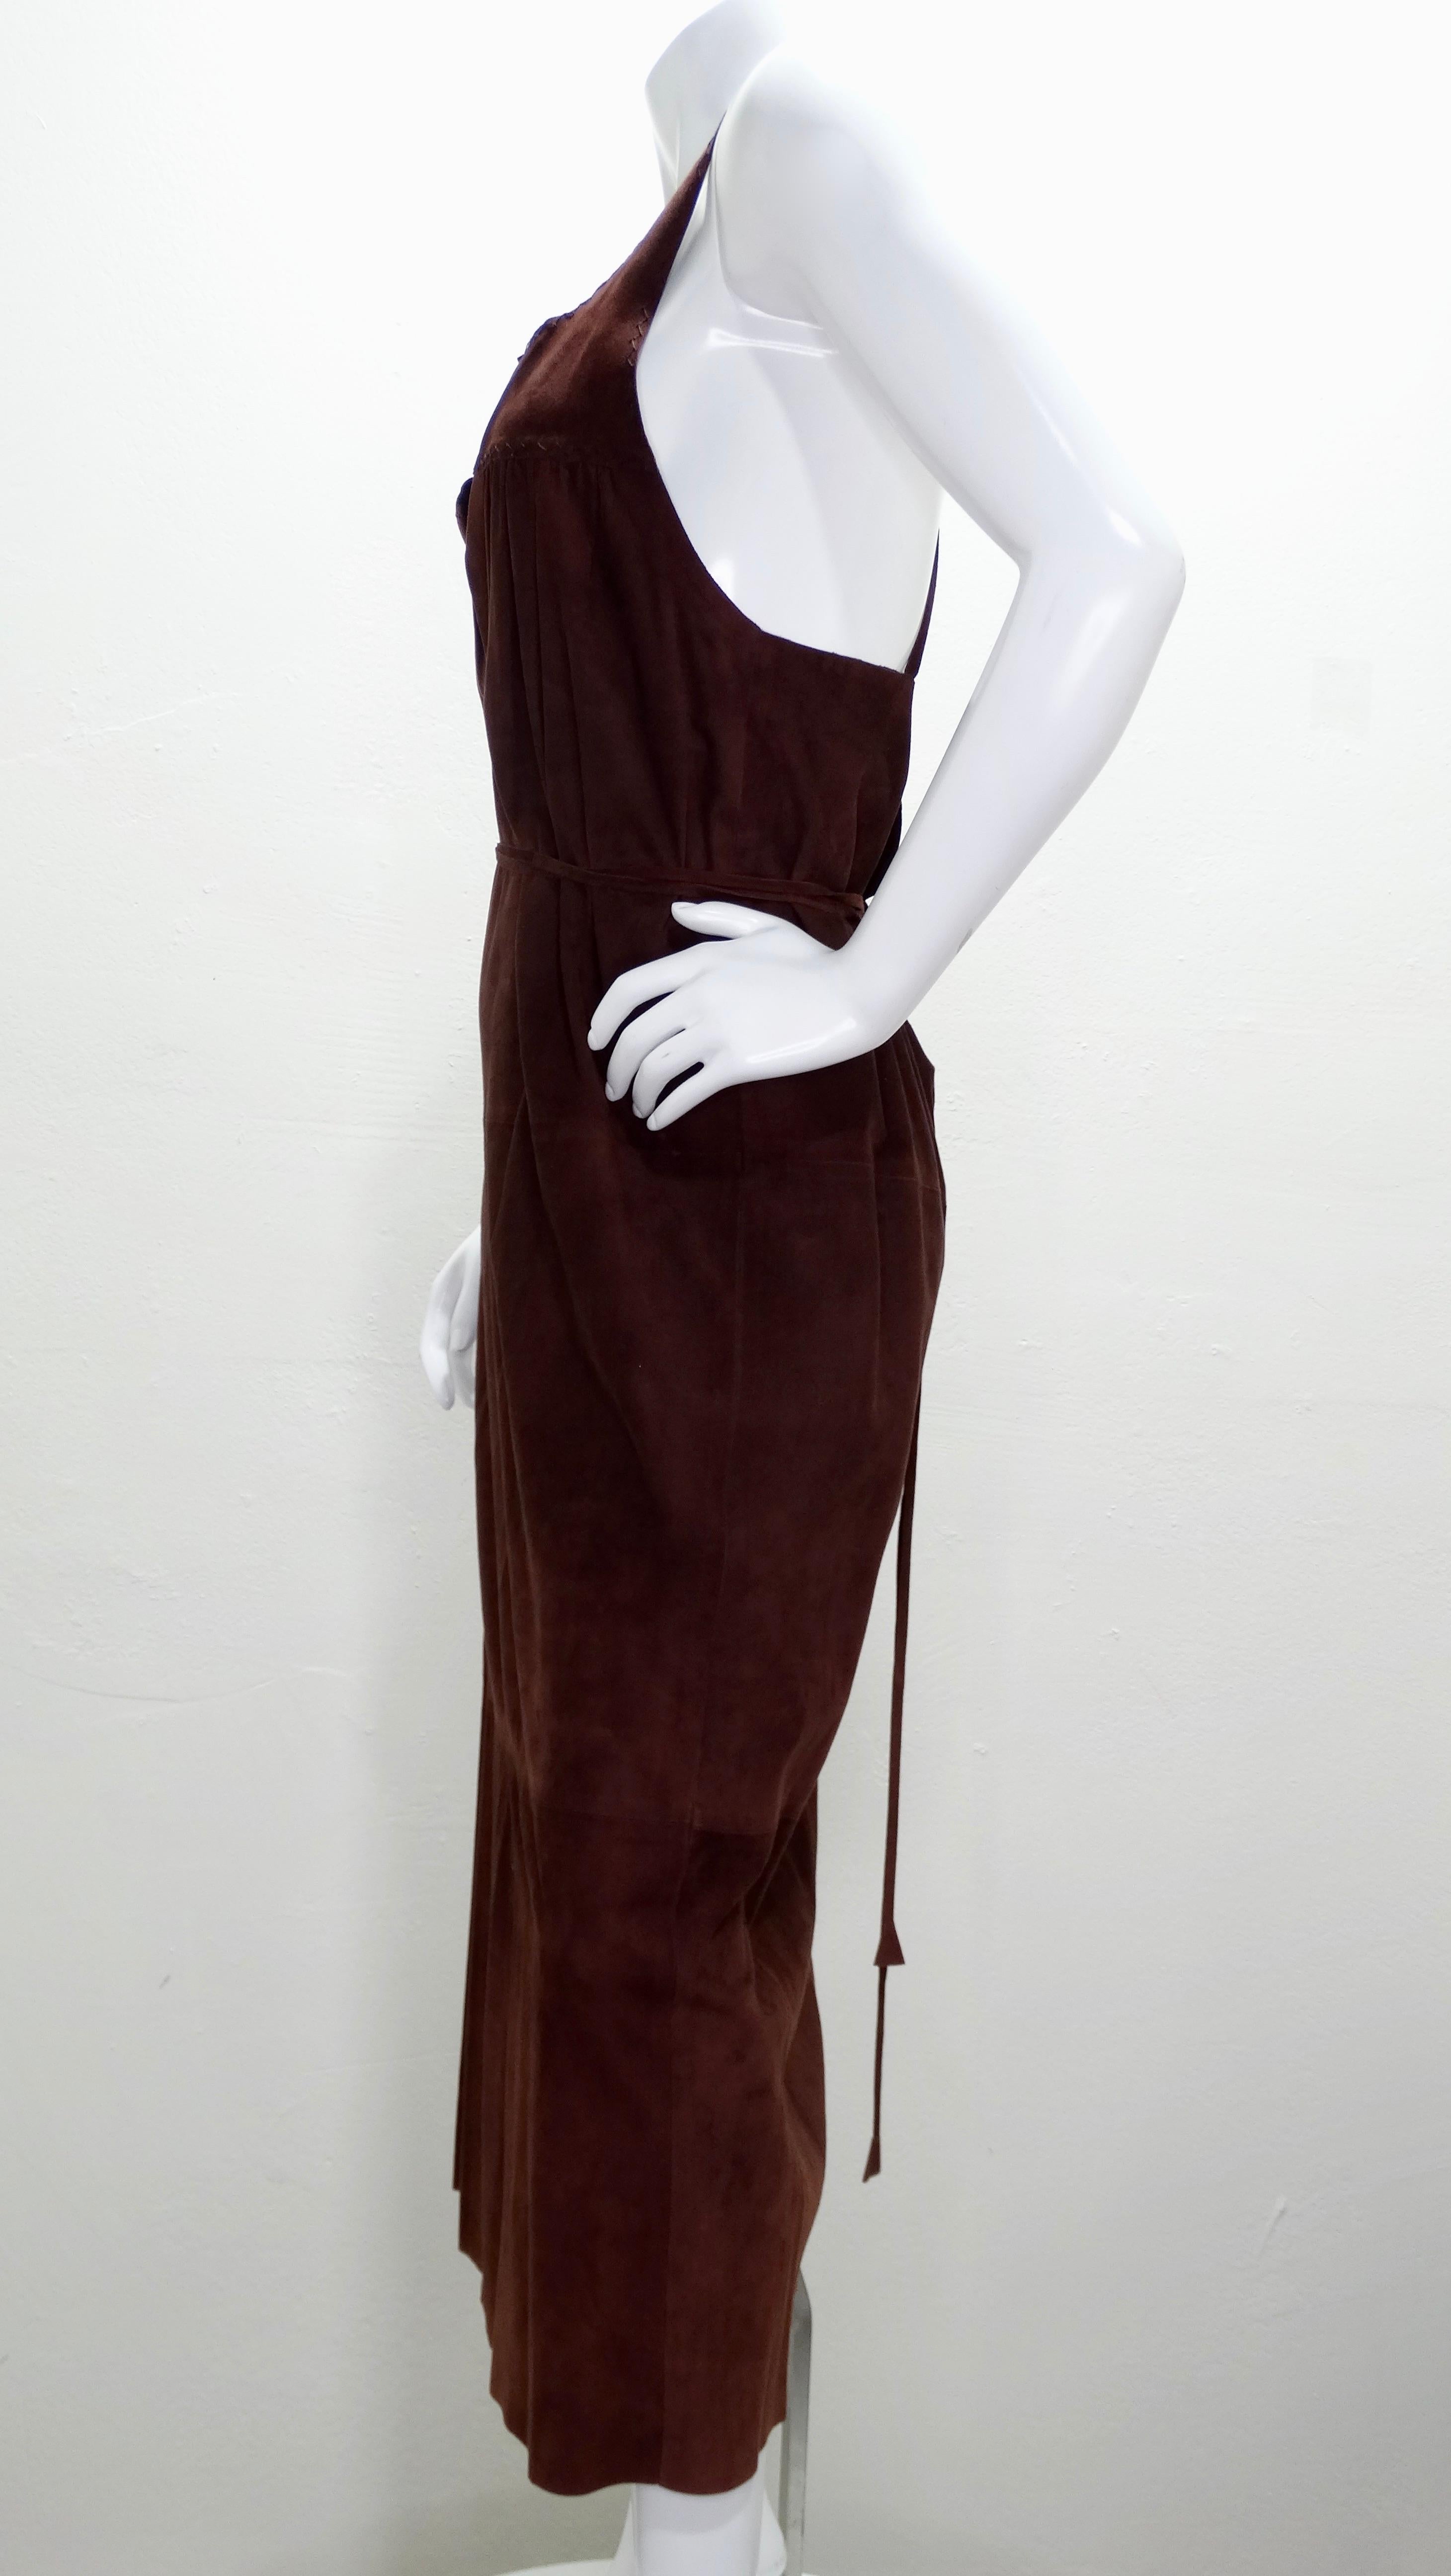 Calling all vintage Gucci lovers! Circa 2002, this chocolate brown suede dress features tank stop straps with a crisscross back, a deep v-neck, exposed stitching trim at the bust, a side slit and an optional suede belt that can also be worn around